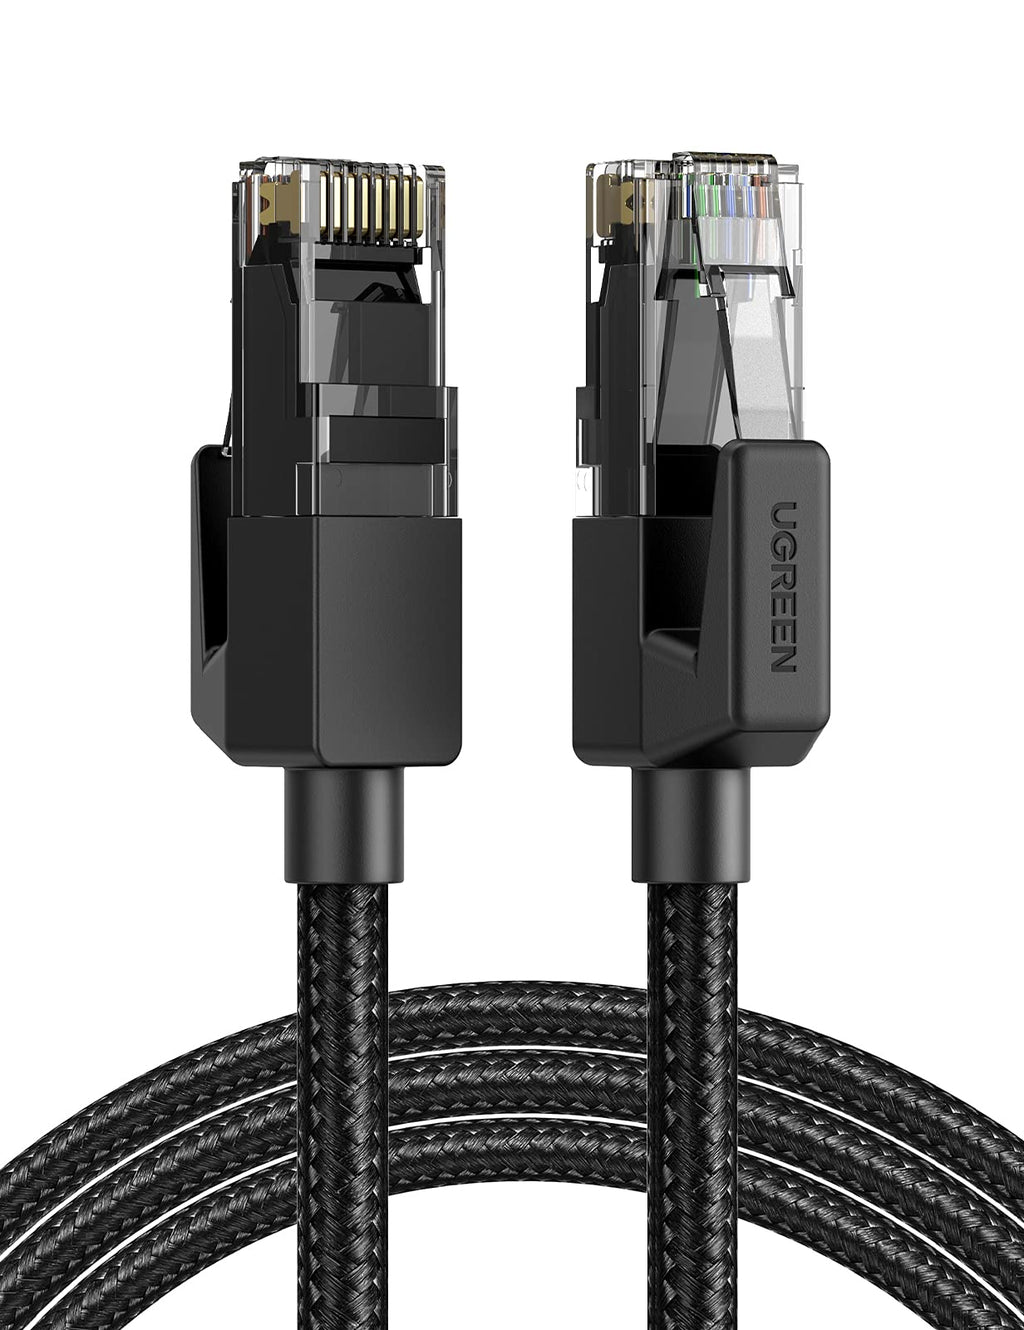  [AUSTRALIA] - UGREEN Cat 6 Ethernet Cable Braided Cat6 Gigabit High Speed 1000Mbps Internet Cable RJ45 Shielded Network LAN Cord Compatible for PC PS5 PS4 PS3 Xbox Smart TV Router 10FT